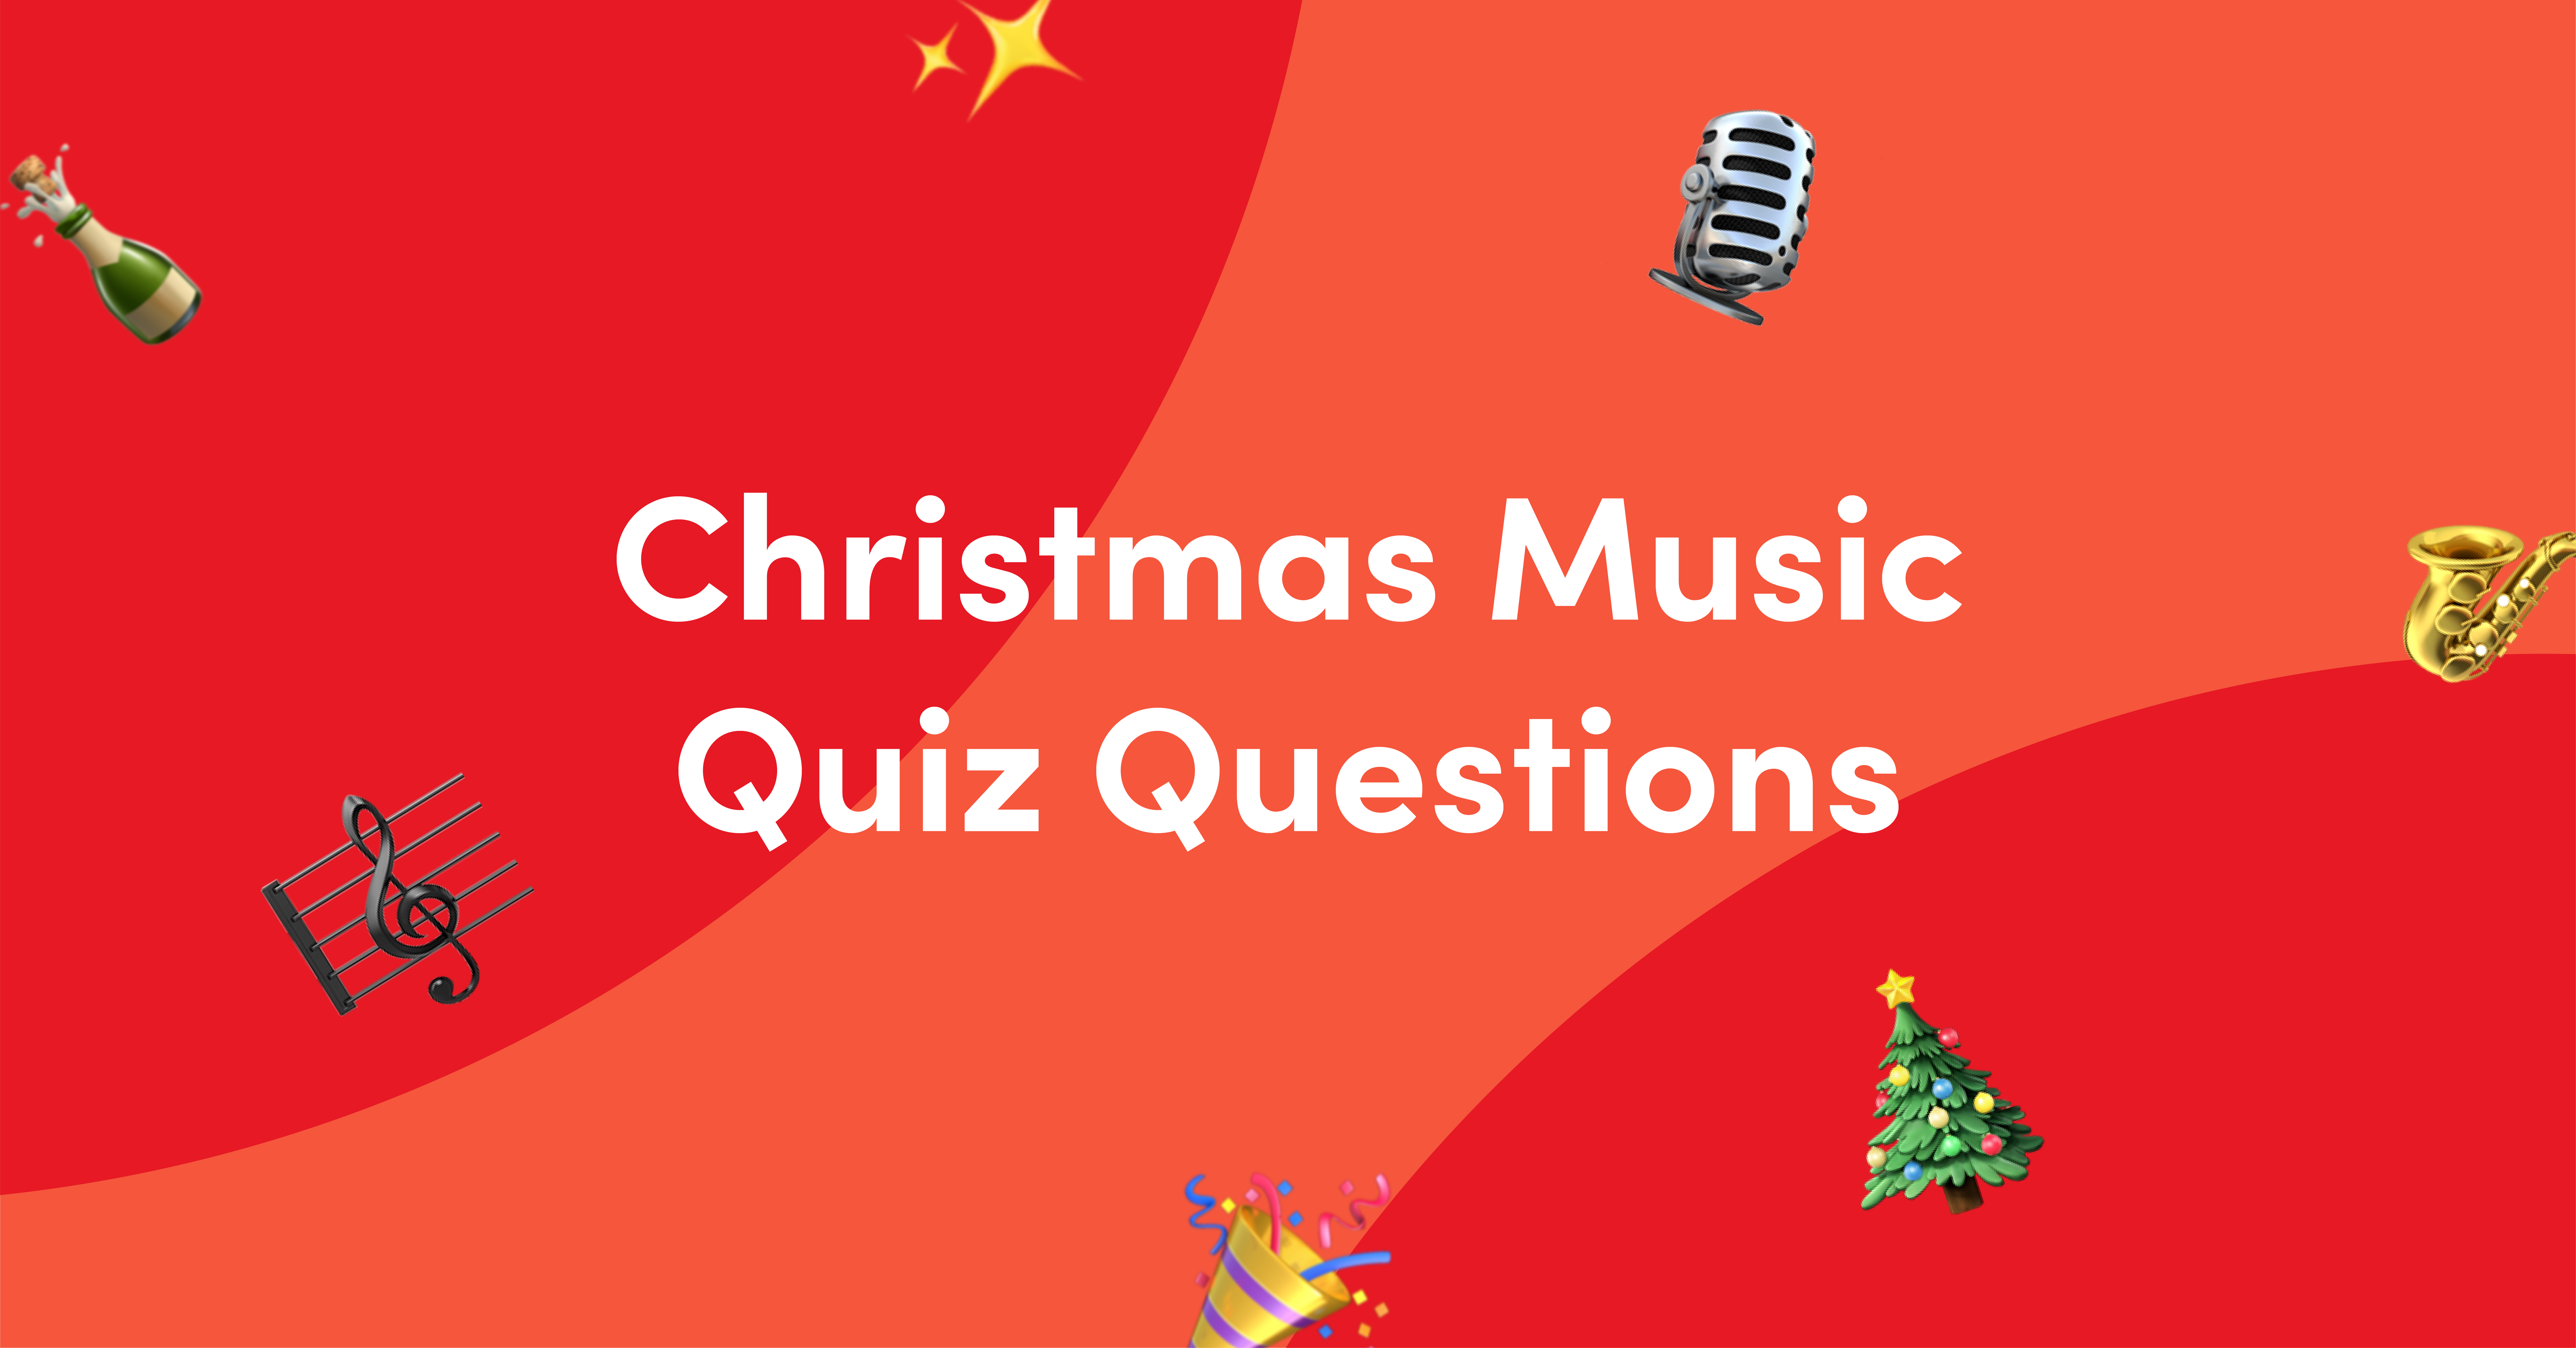 50 Christmas Music Quiz Questions and Answers - Kwizzbit